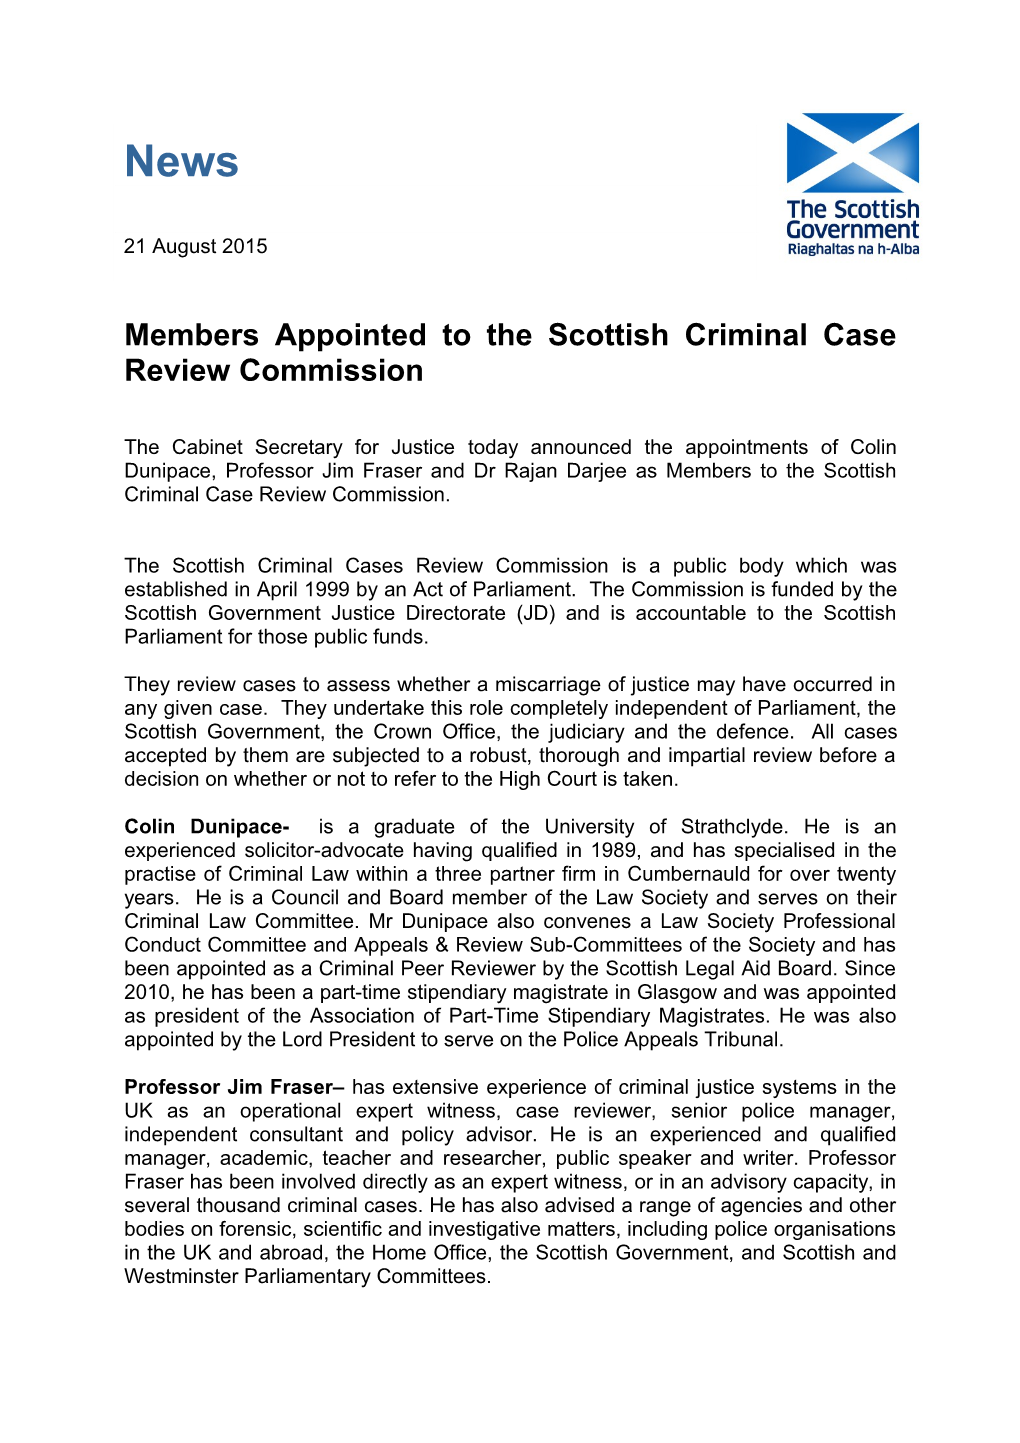 Members Appointed to the Scottish Criminal Case Review Commission